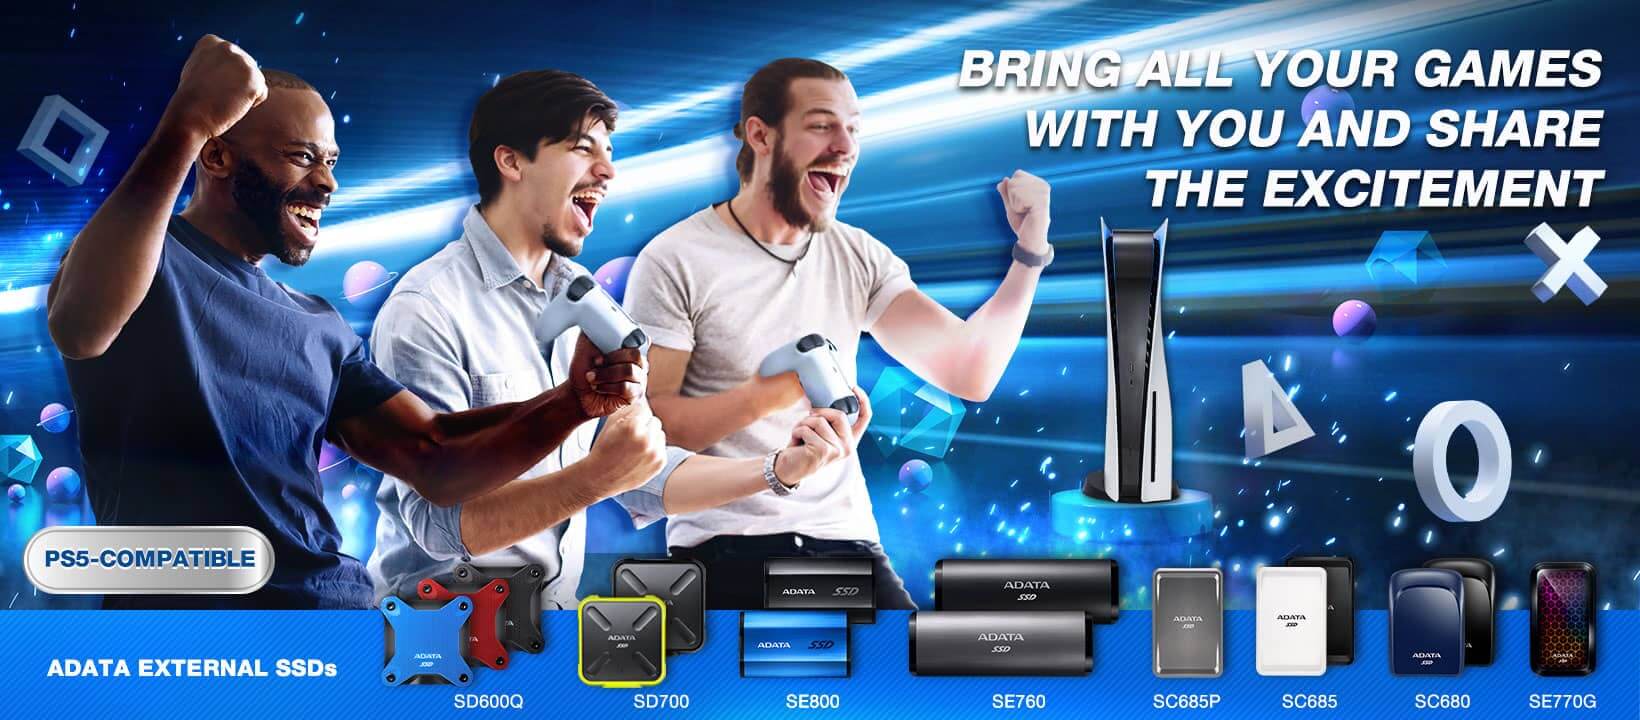 ADATA Bring All Your Games With You and Share The Excitement